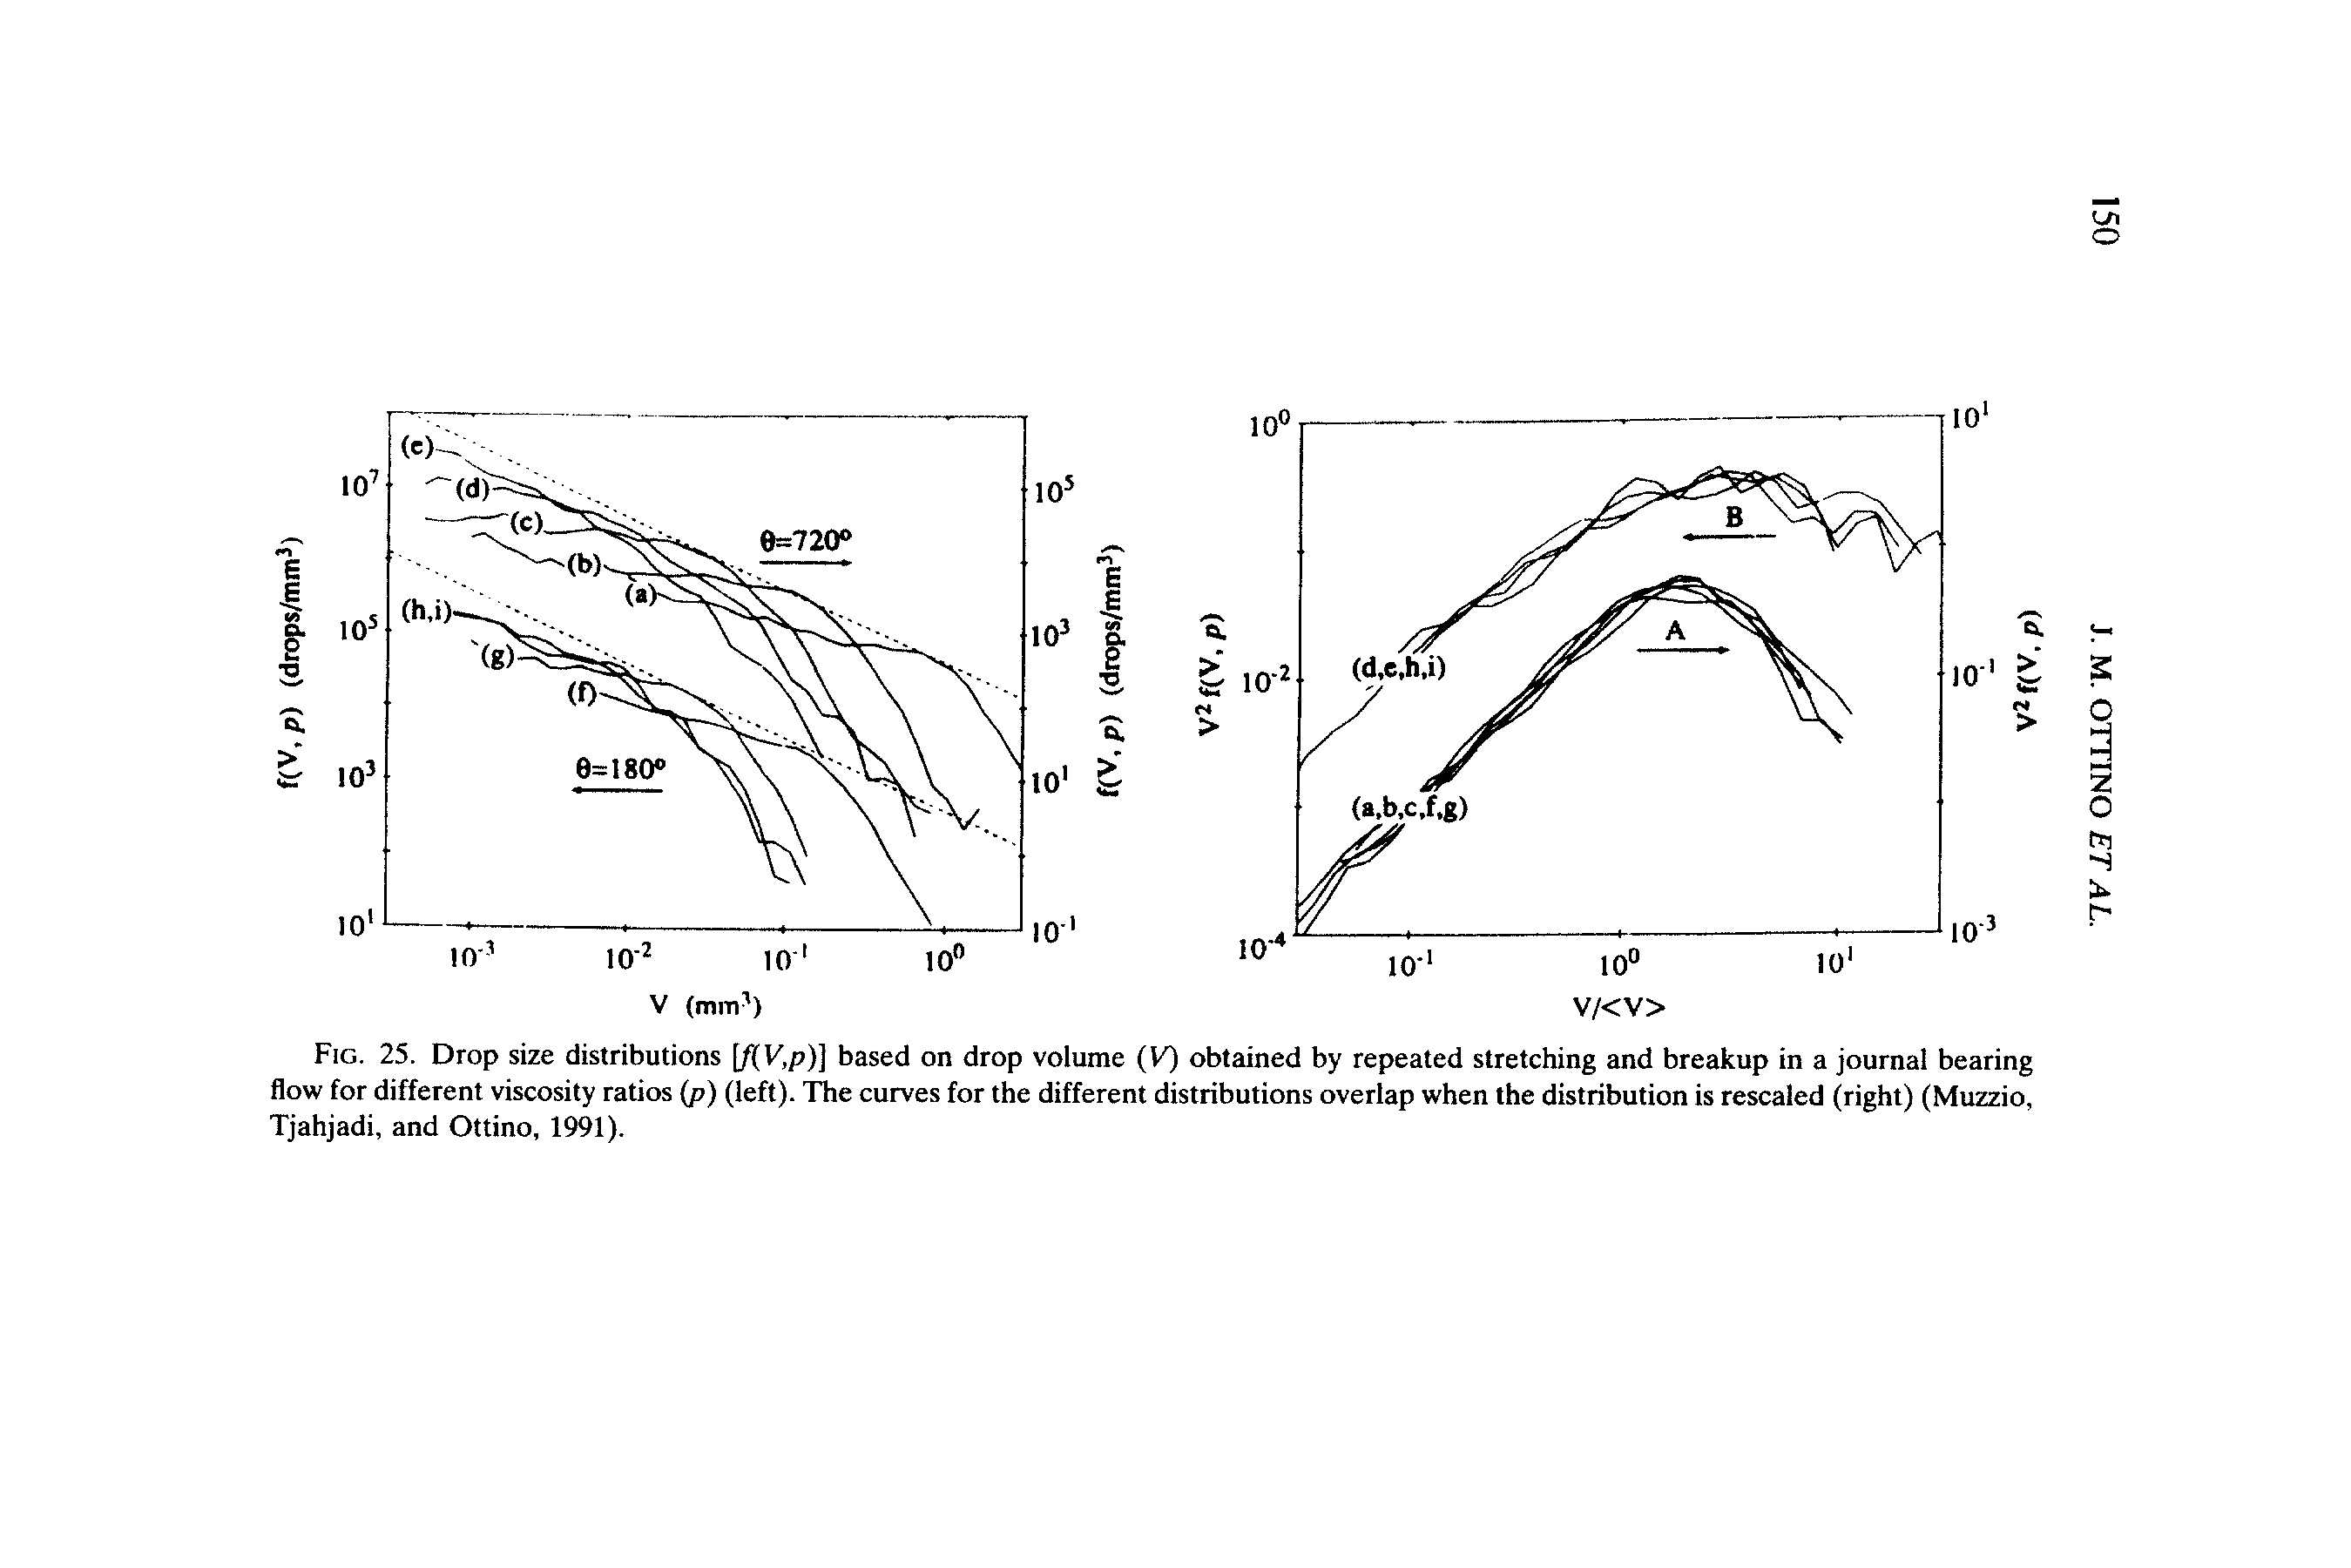 Fig. 25. Drop size distributions f(V,p)] based on drop volume (V) obtained by repeated stretching and breakup in a journal bearing flow for different viscosity ratios (p) (left). The curves for the different distributions overlap when the distribution is rescaled (right) (Muzzio, Tjahjadi, and Ottino, 1991).